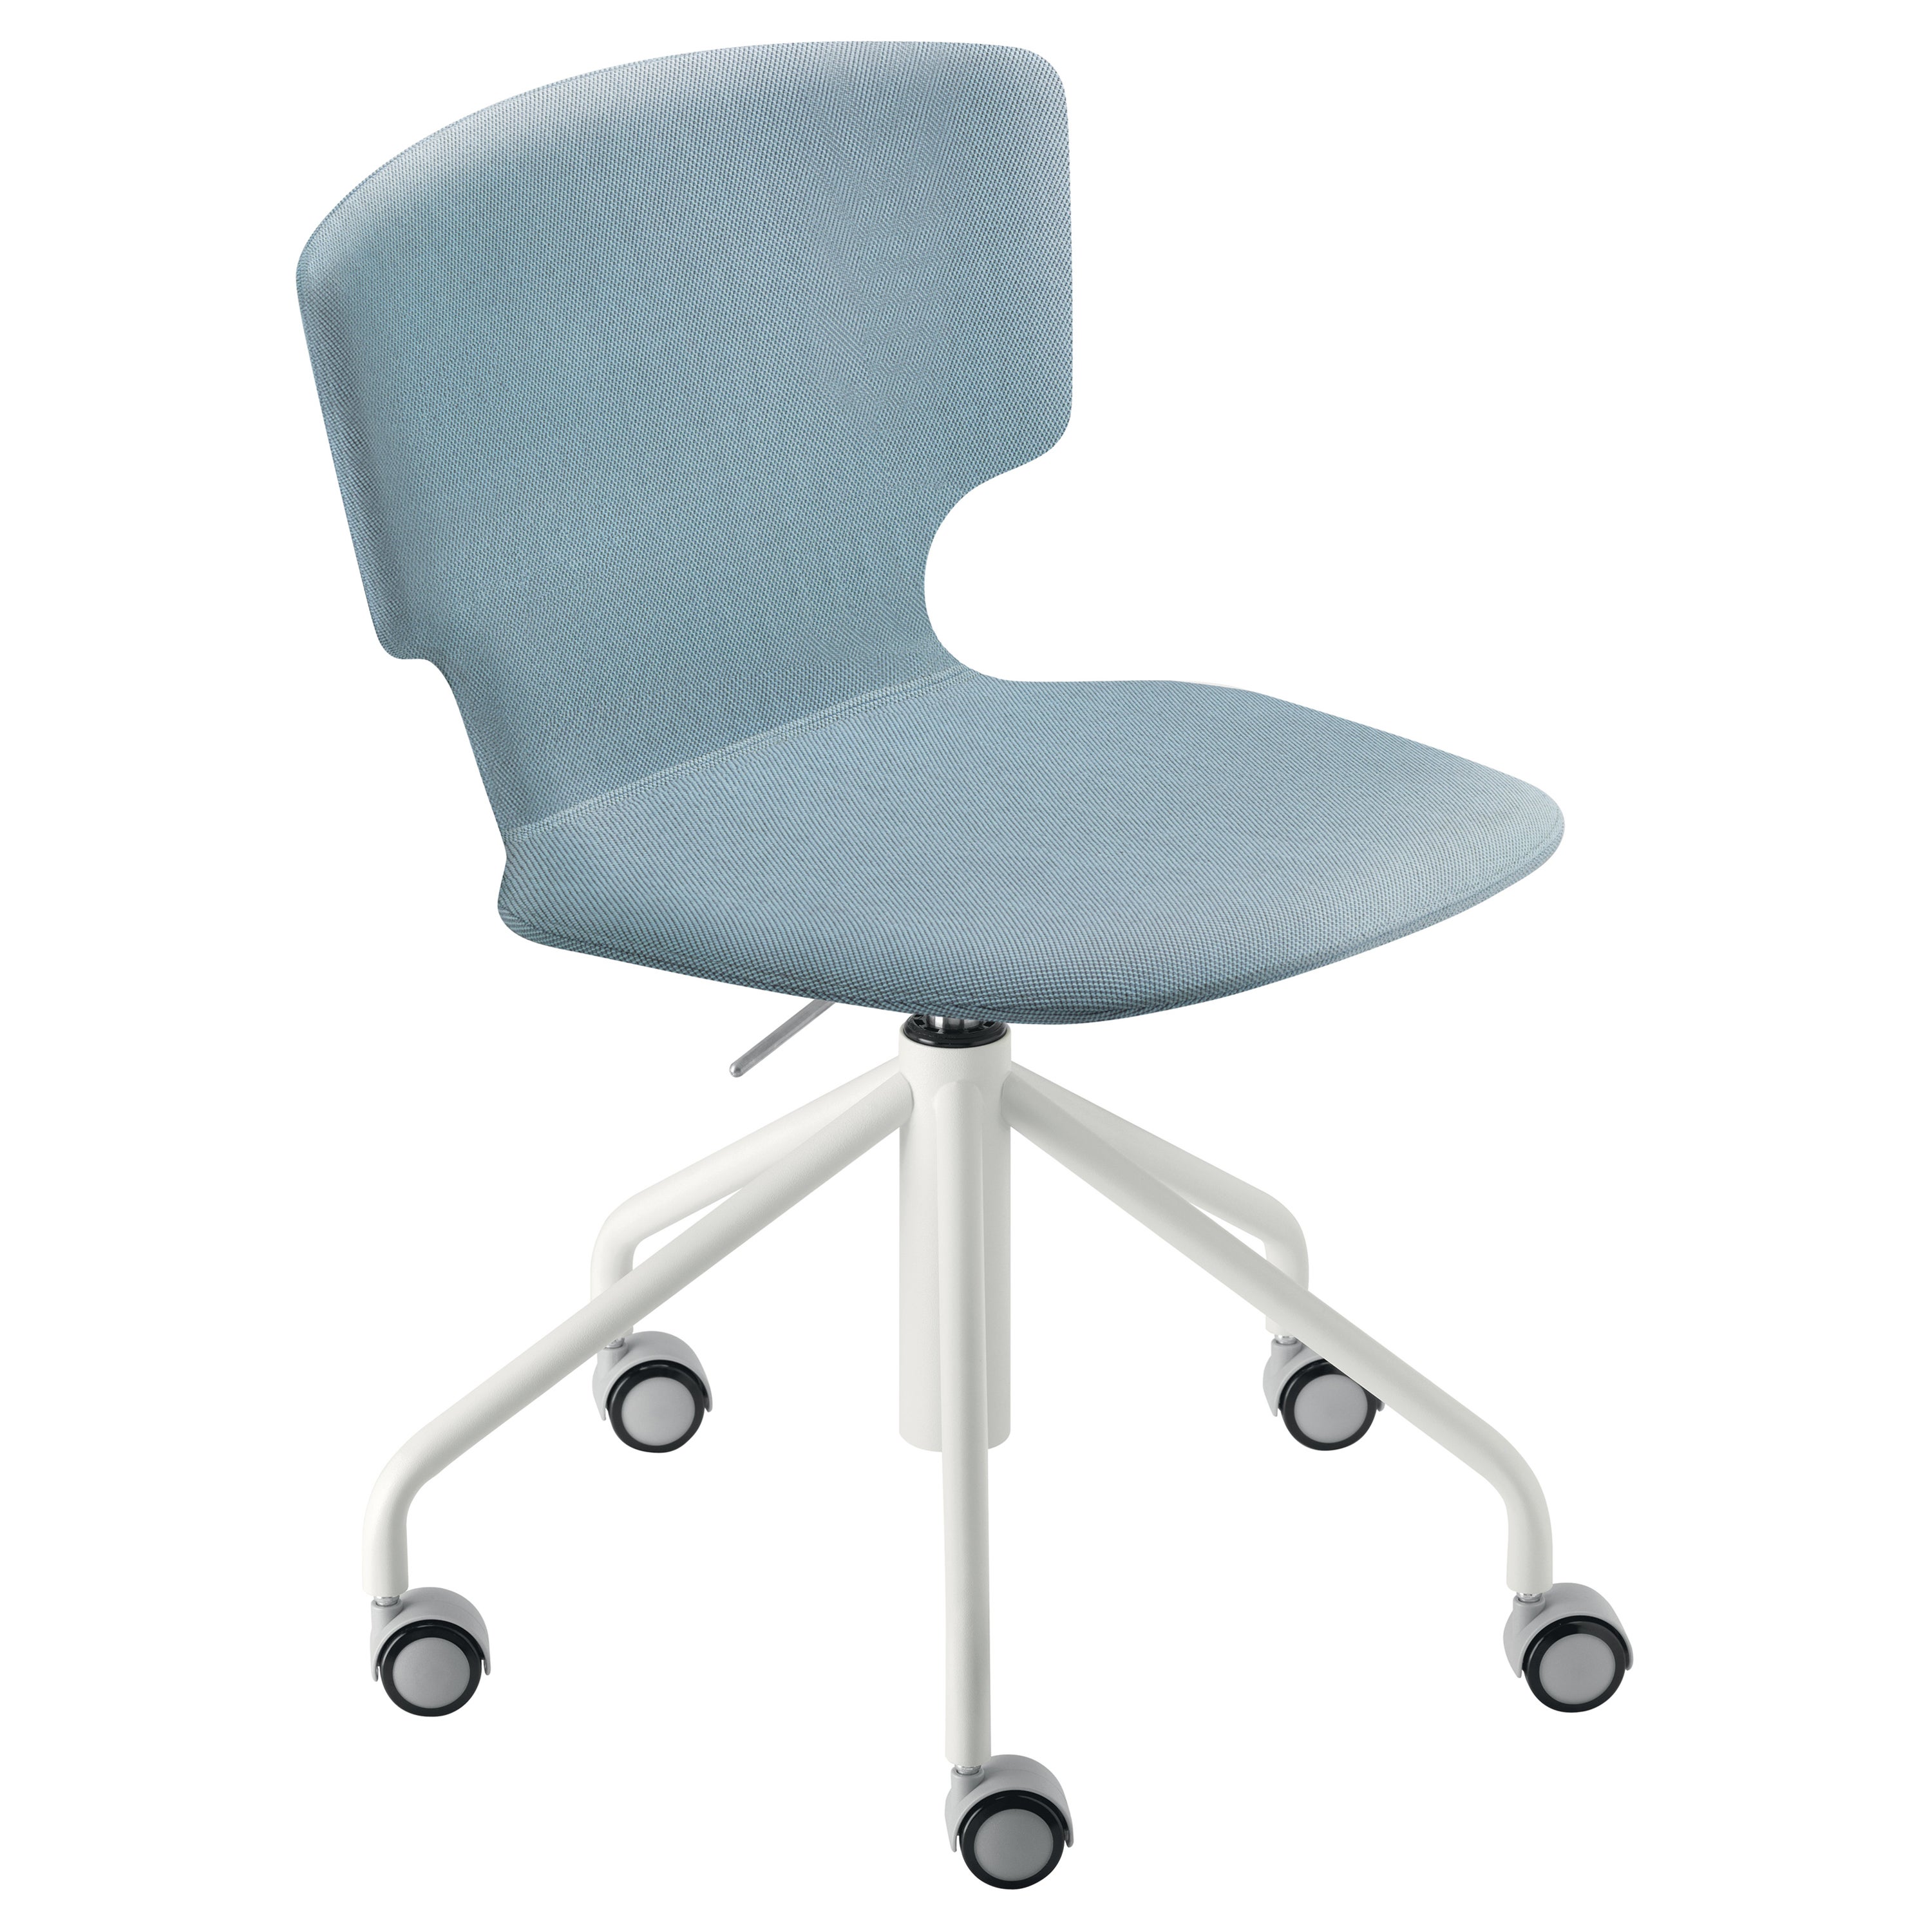 Alias 52C Enna Studio Chair in Upholstery with White Steel Frame